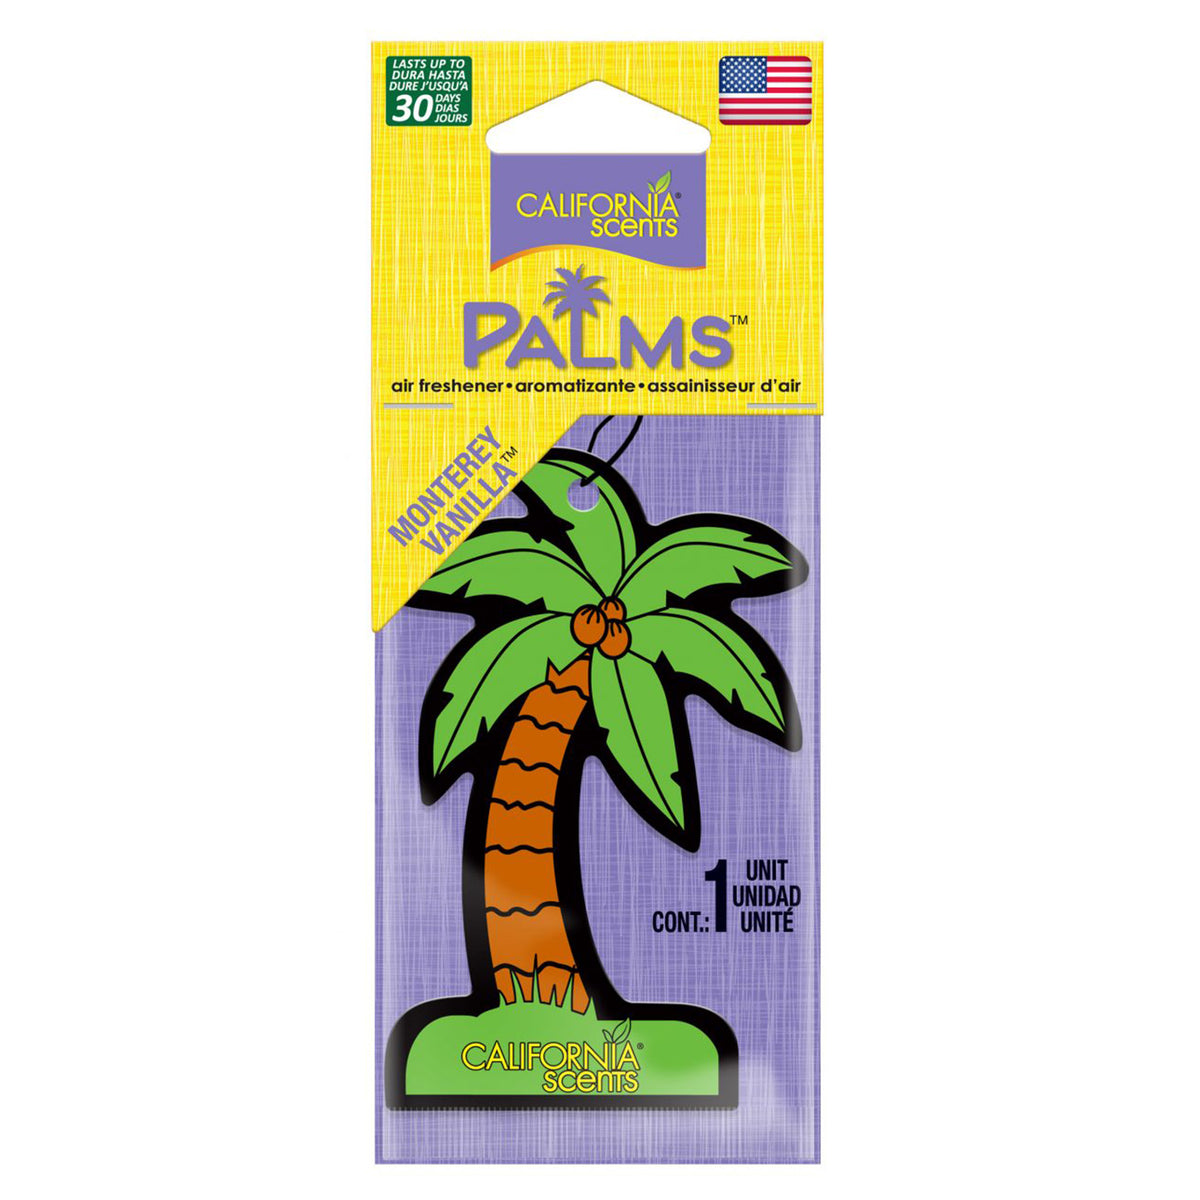 Vanilla scent car air freshener Hang palms anywhere you want a pleasant fragrance.